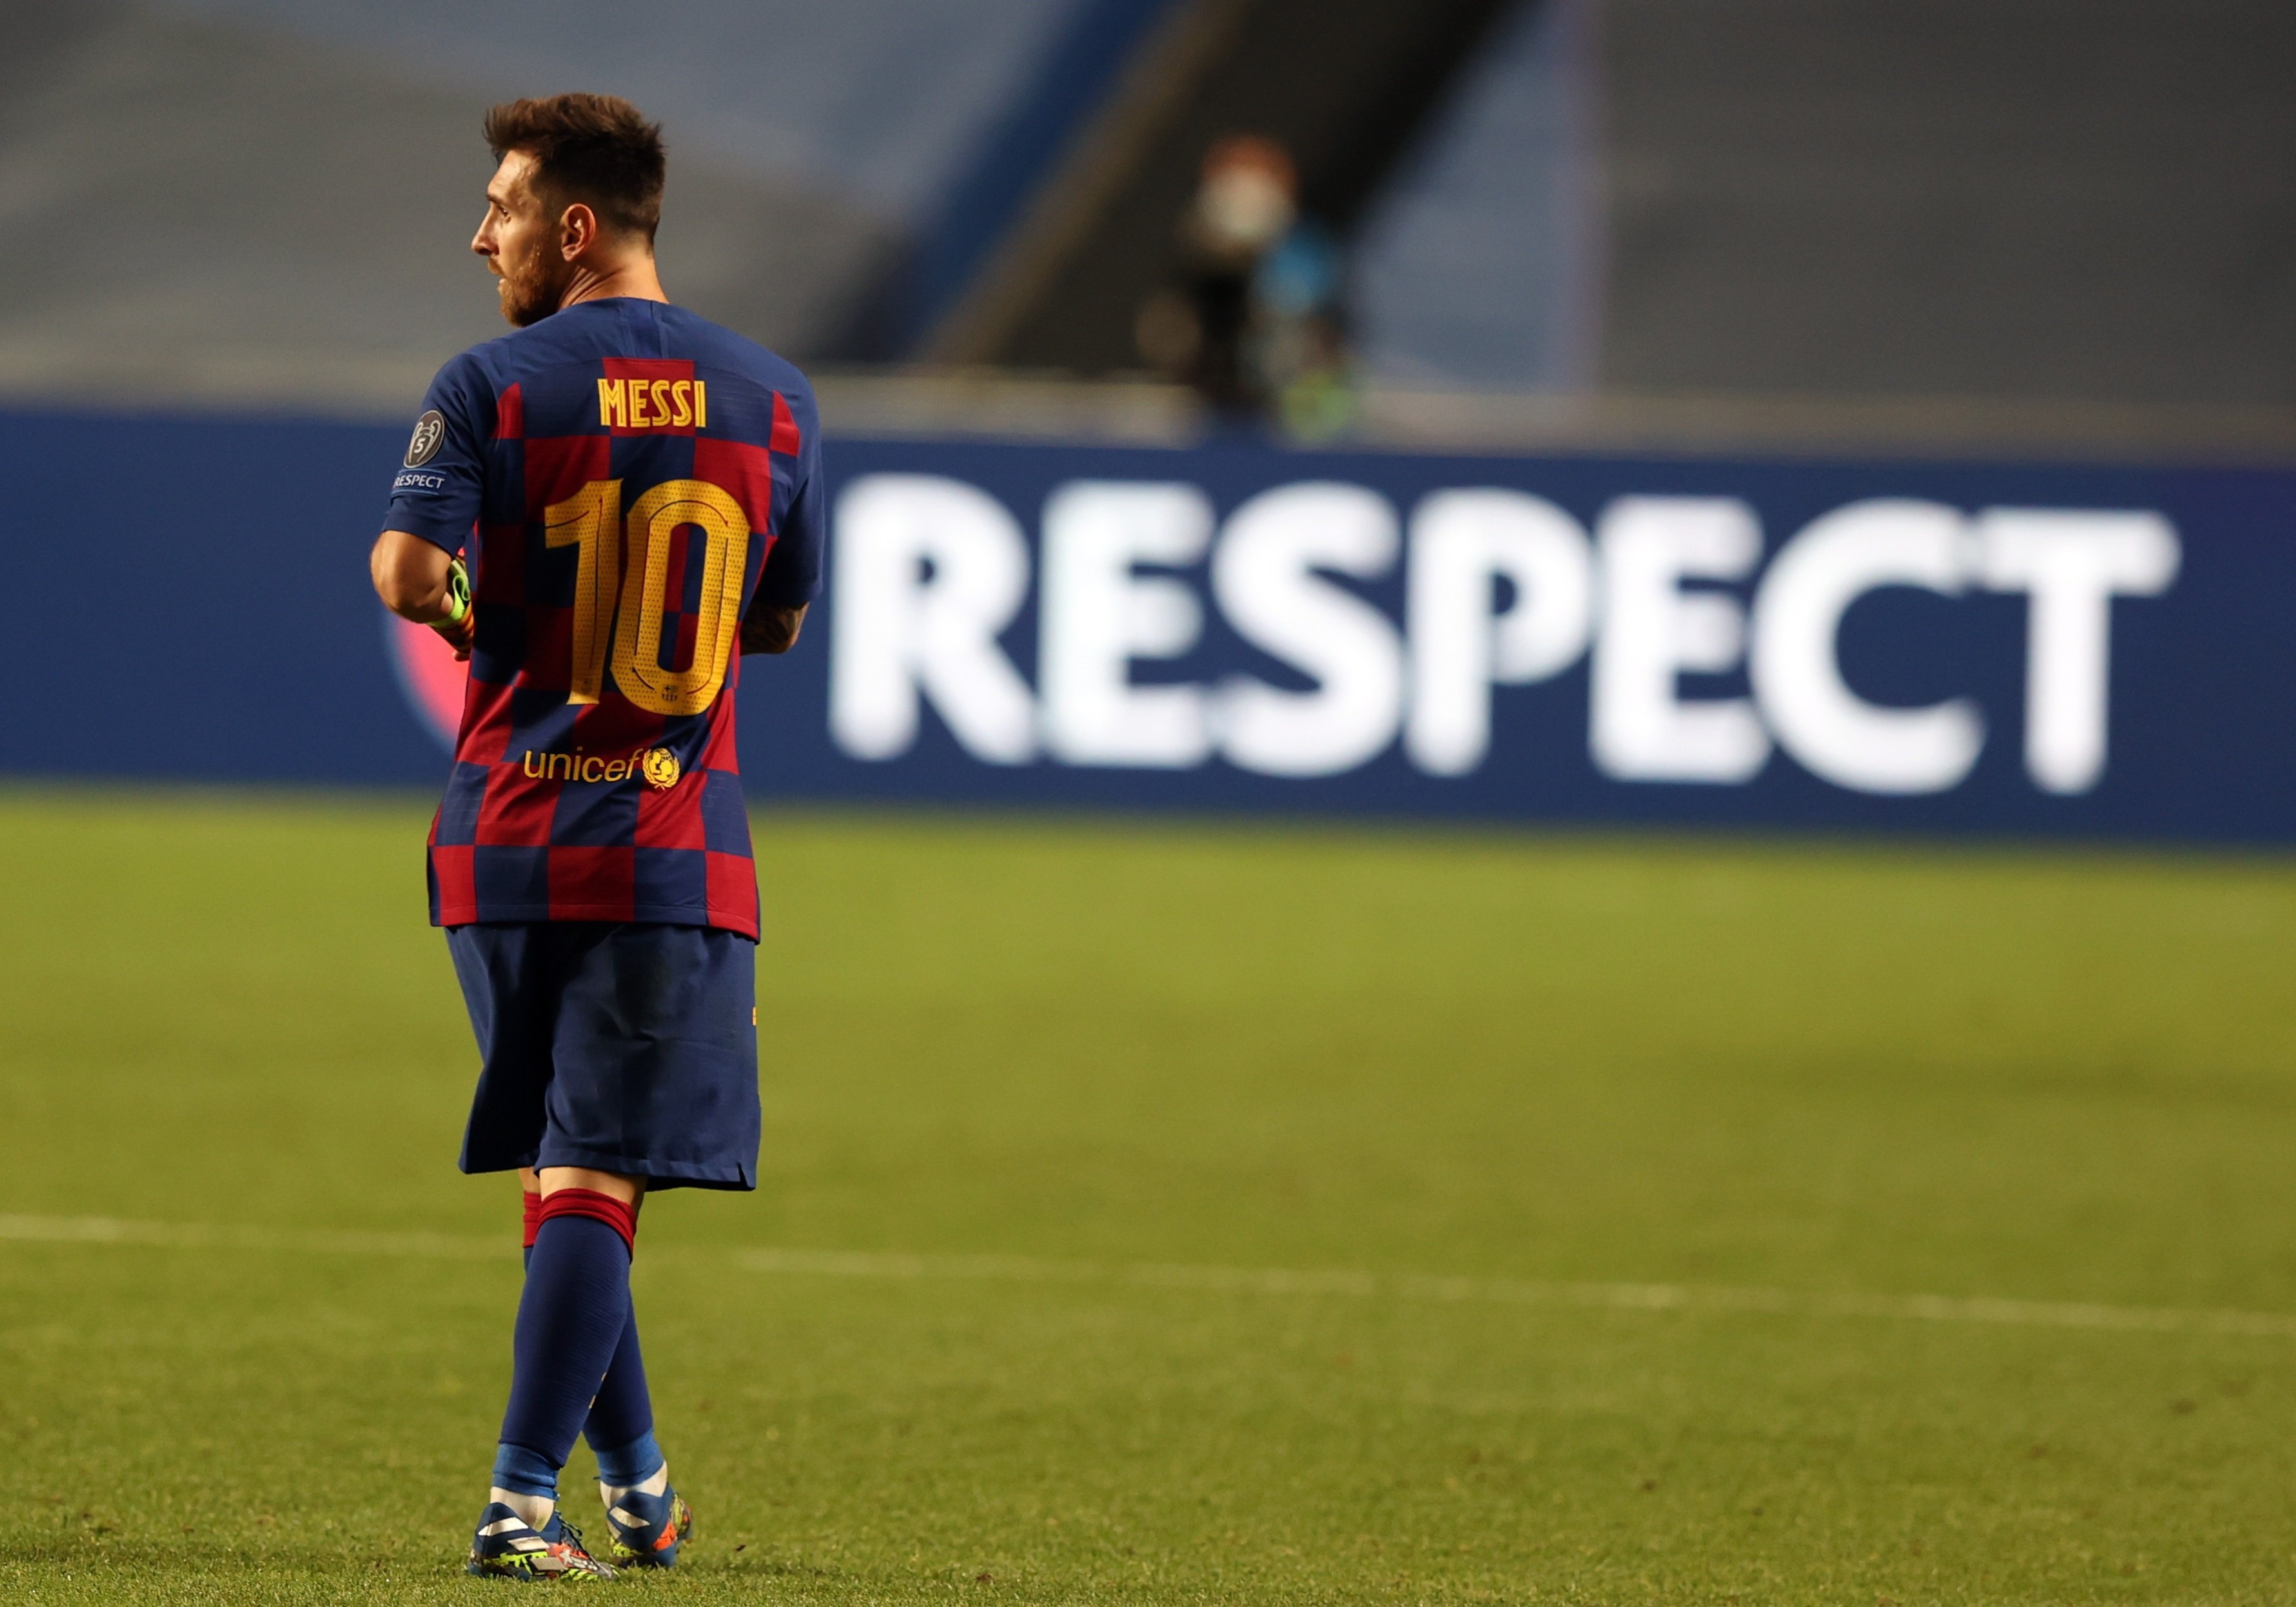 Barça refuses to budge on Messi's buy-out clause: 700 million euros or no deal